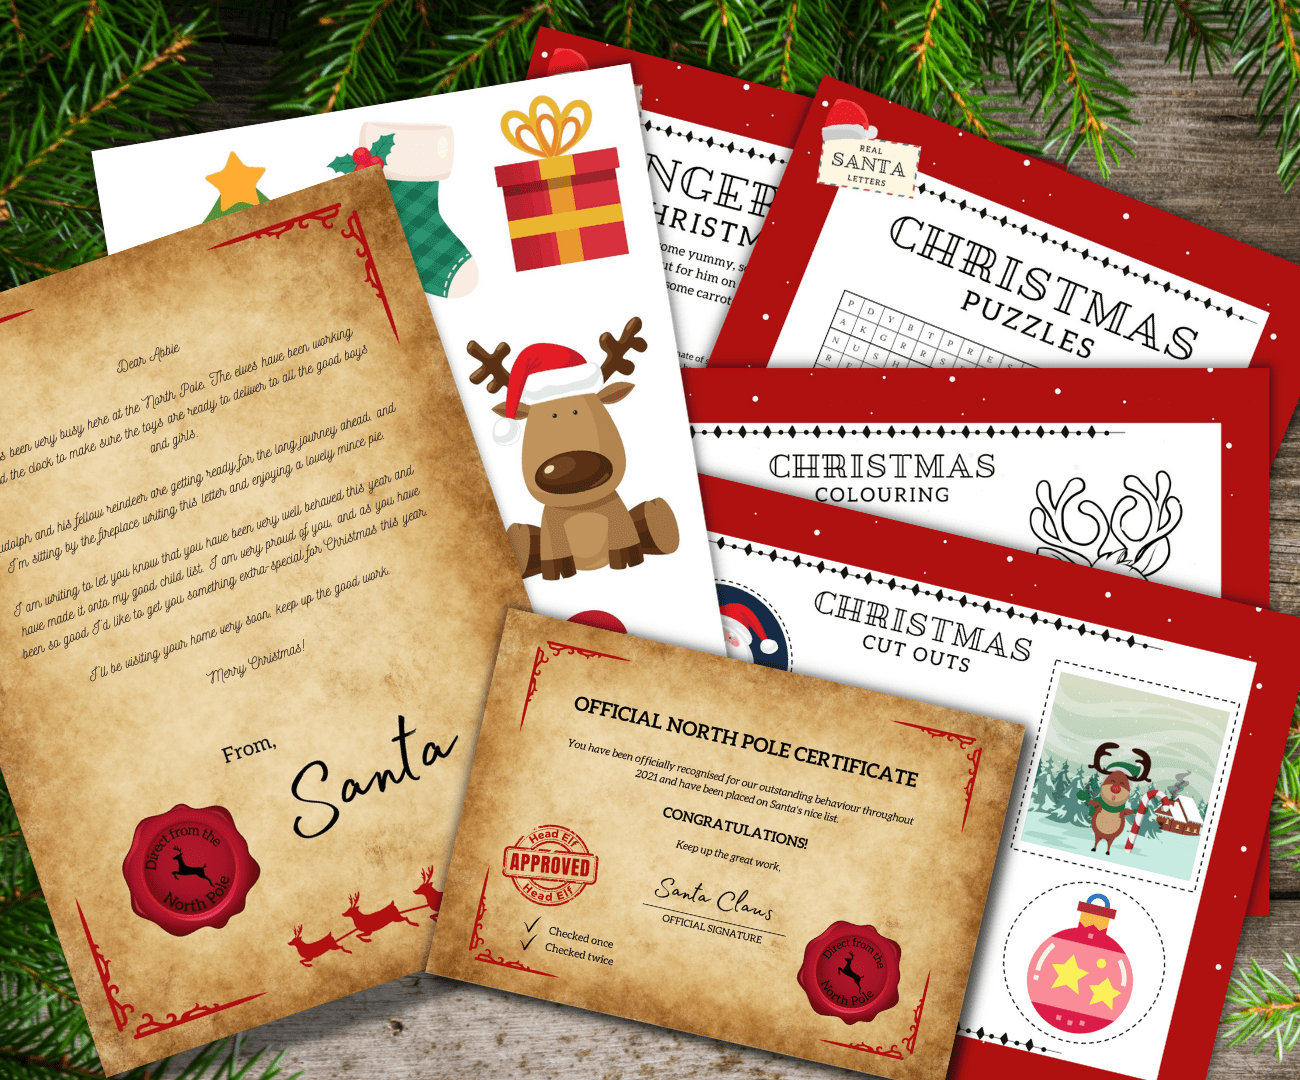 Personalised Santa Letter, Certificate, Stickers & Activity Sheets